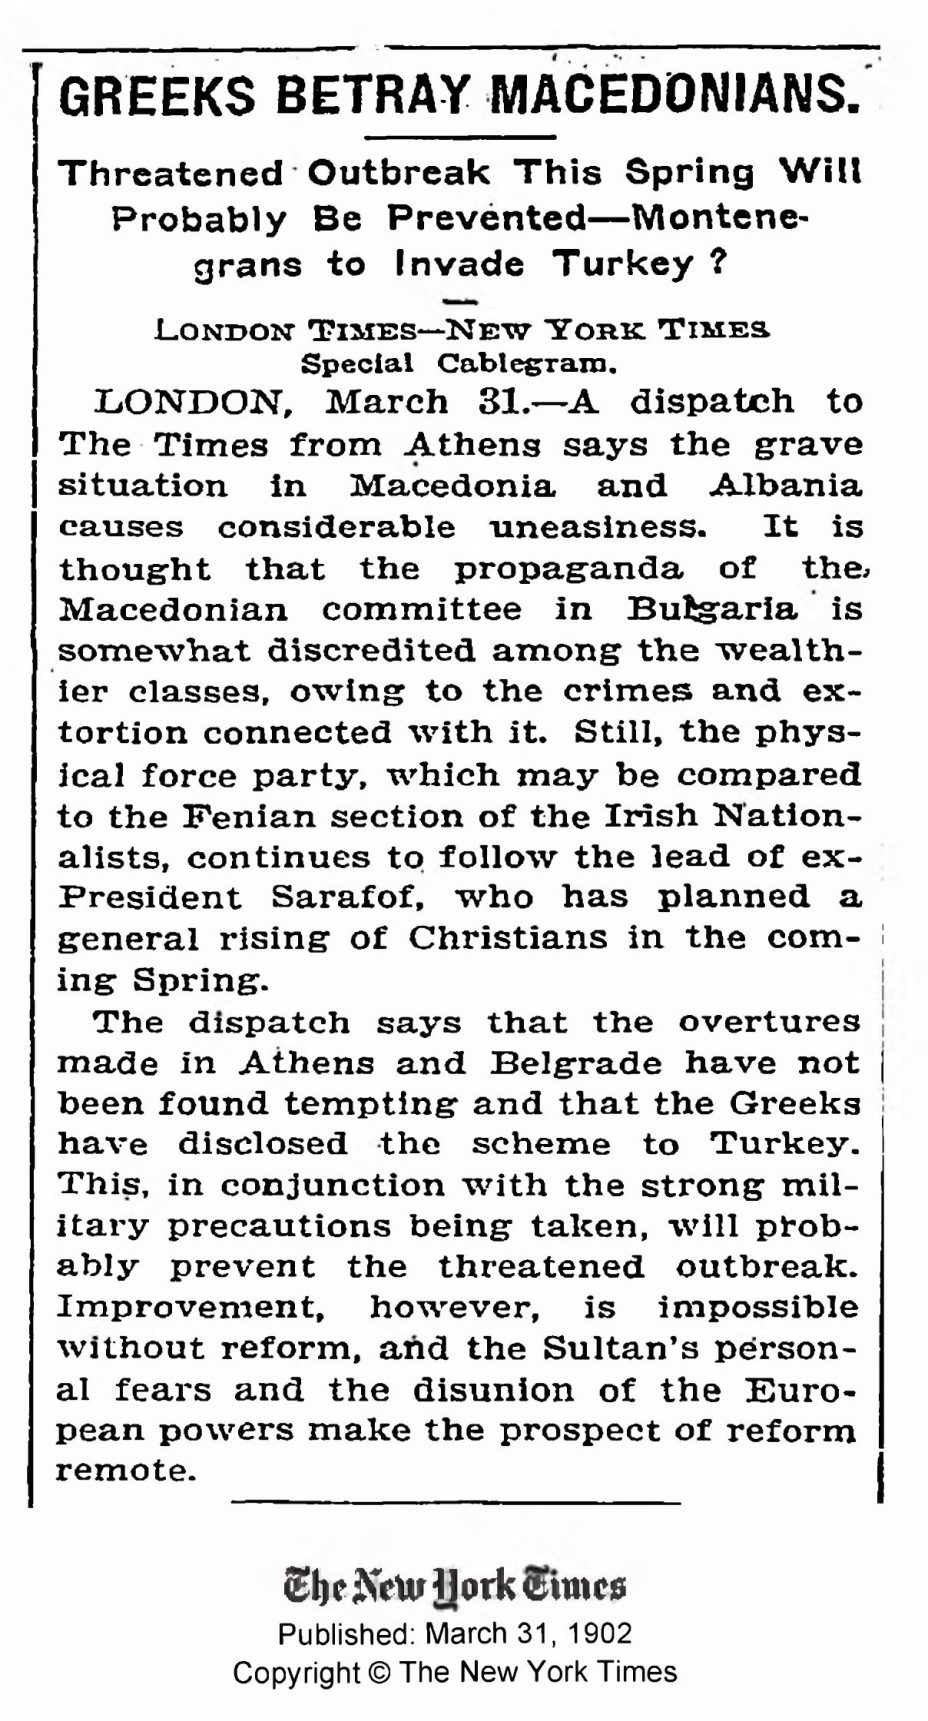 1902.03.31_The New York Times - Greeks betray Macedonians